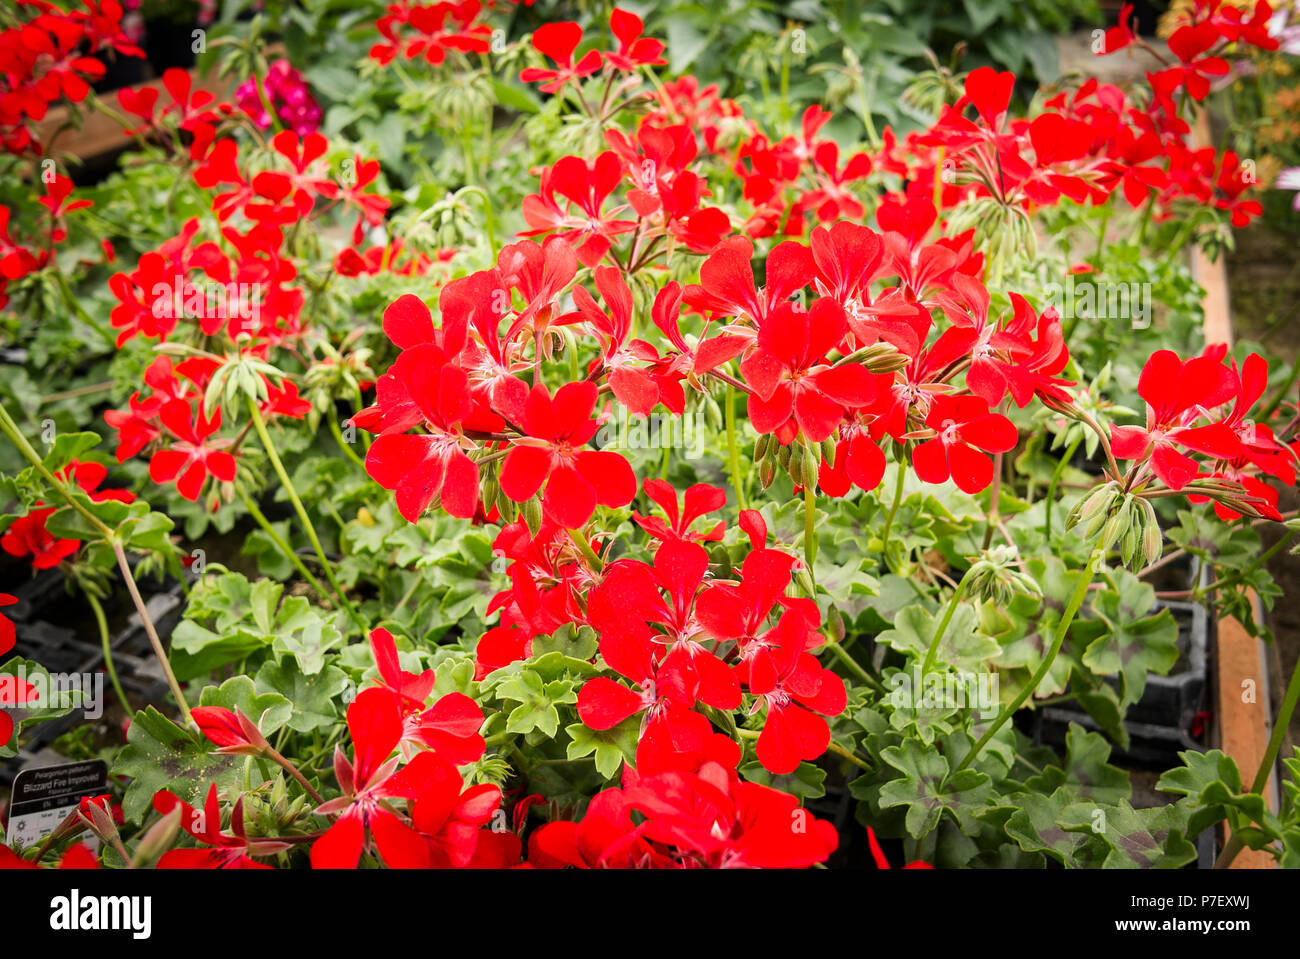 Bedding pelargoniums variety Blizzard Fire Improve for sale at an English bedding plant nursery Stock Photo